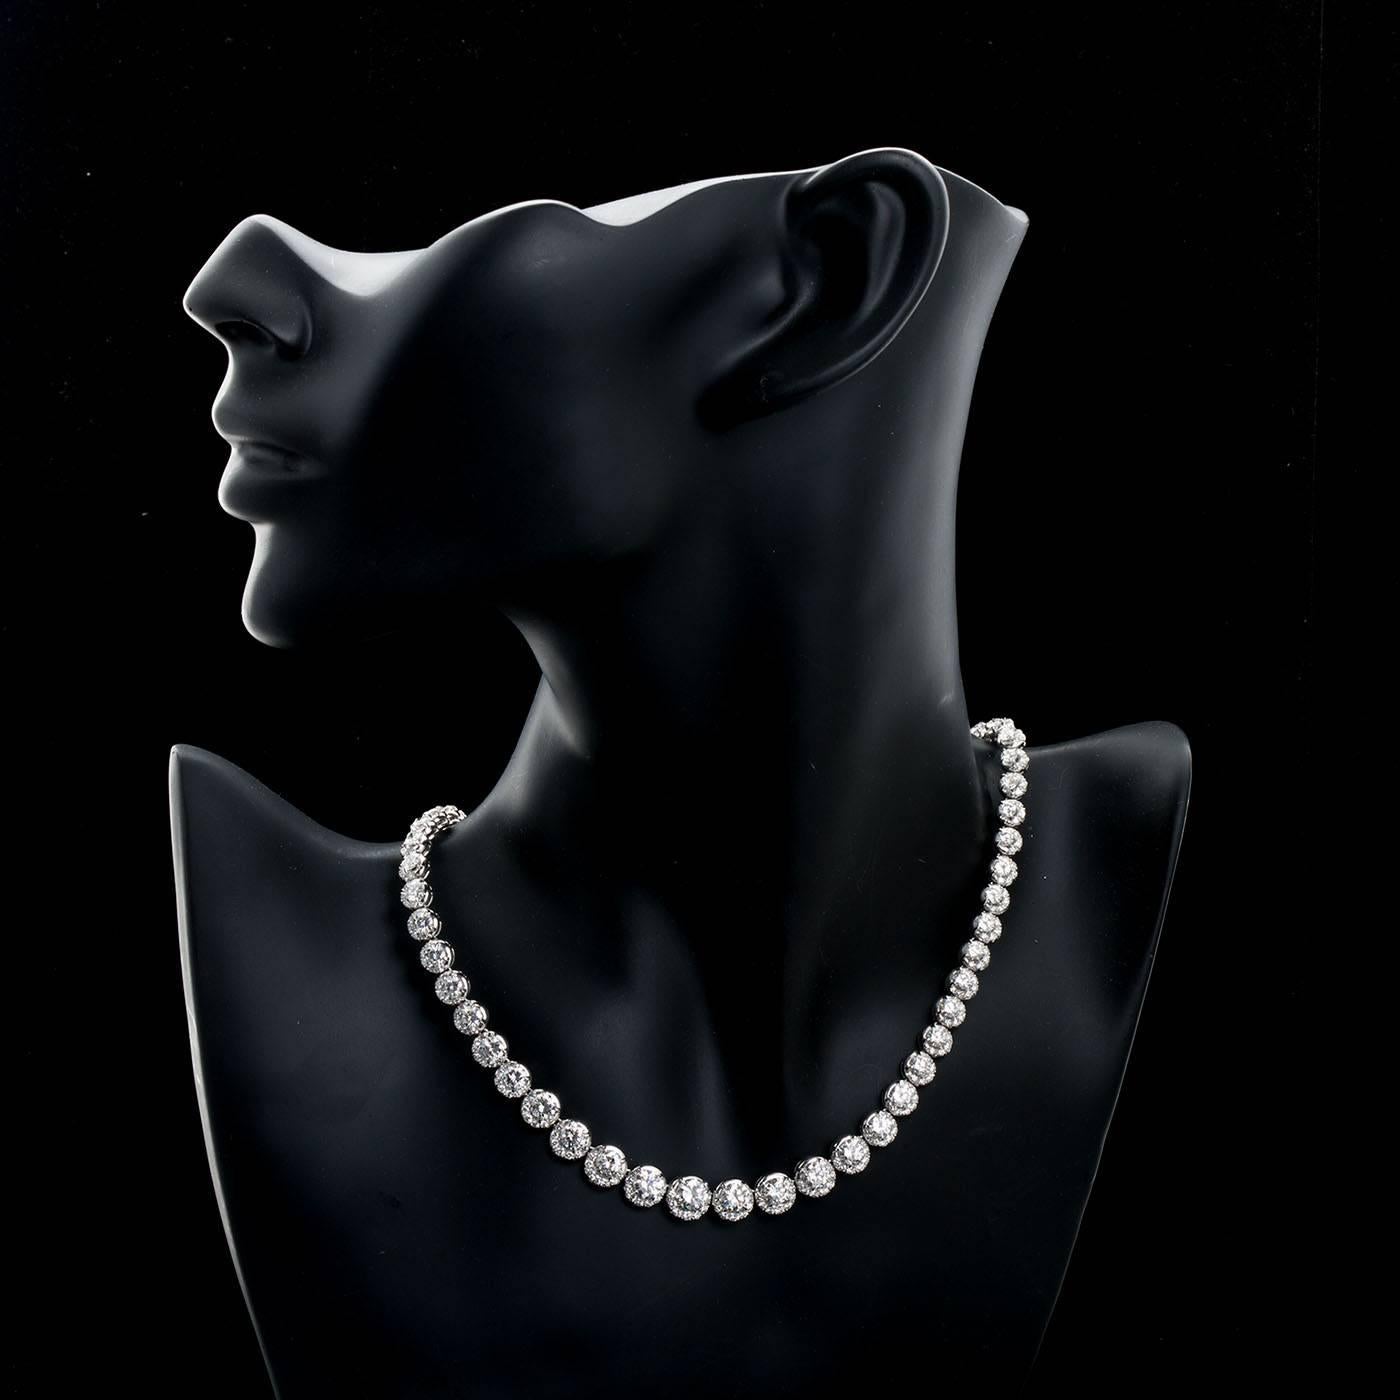 A unique diamond in platinum Rivieré necklace set with approximately twenty carats of very high quality (G+ color VS clarity) fine round brilliant cut diamonds set in four-prong mountings with a drape of diamond pave beneath each diamond.  Largest